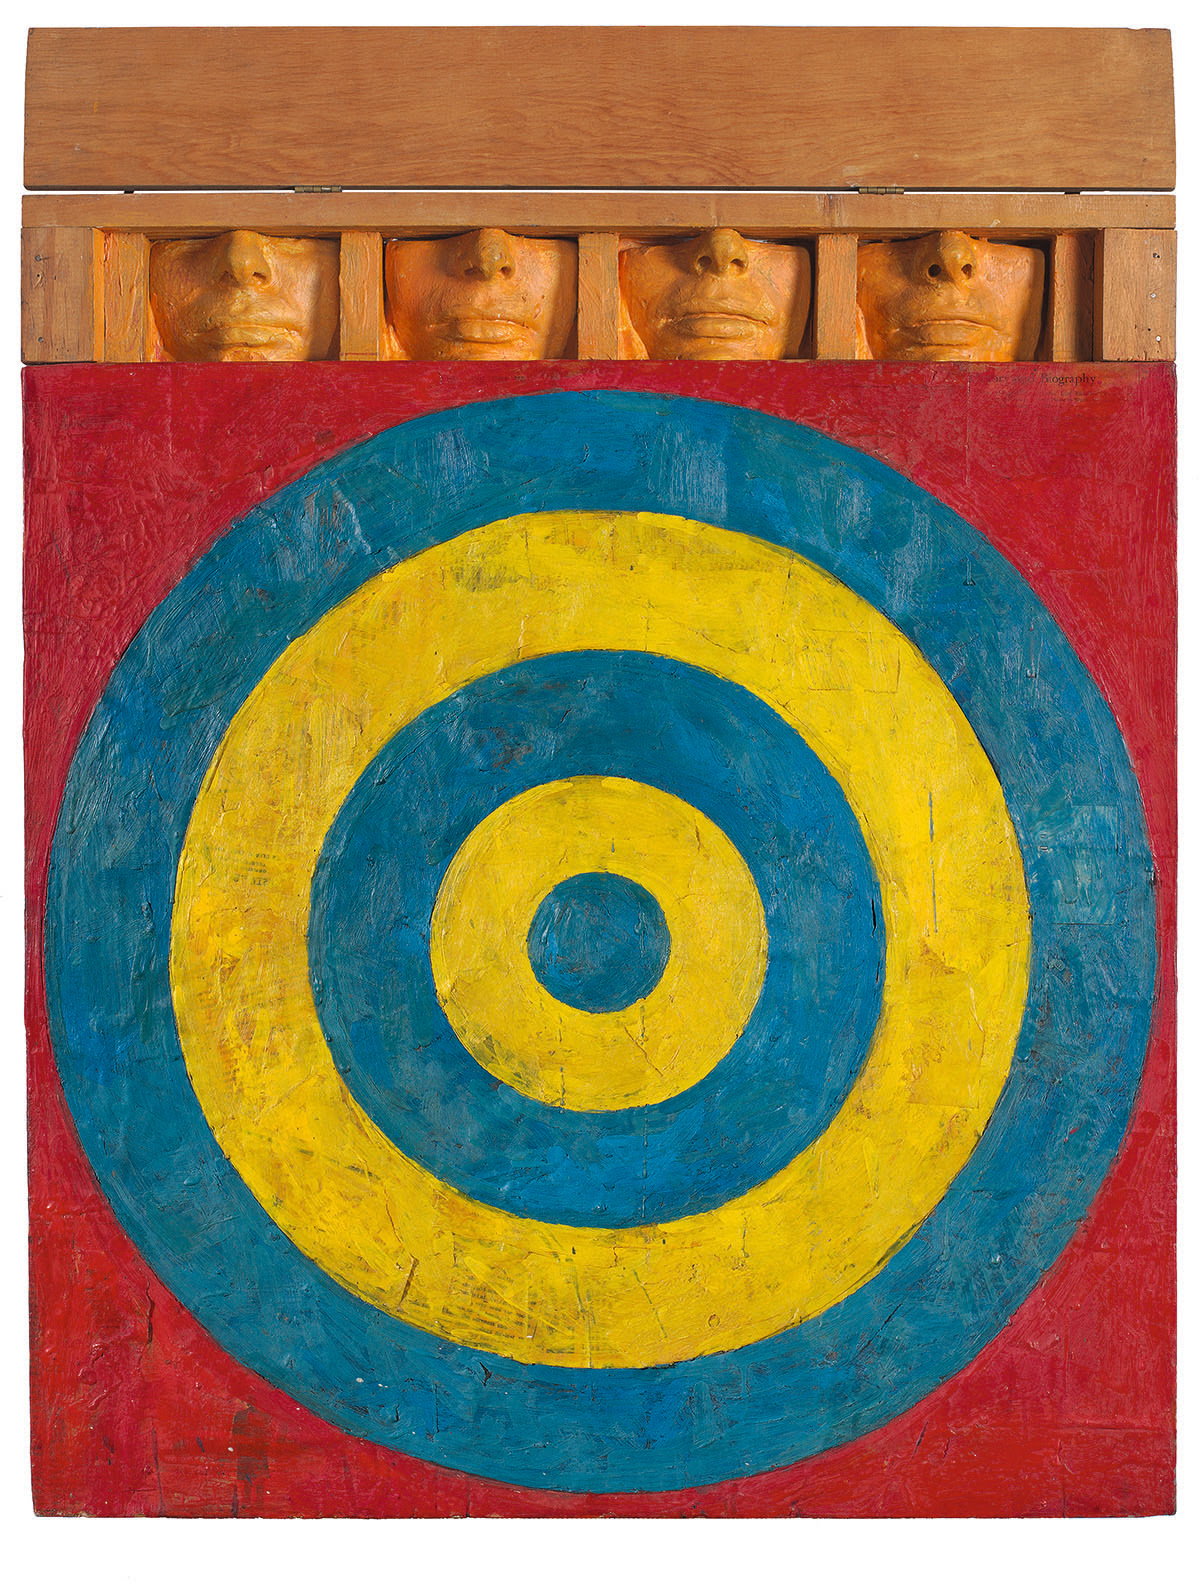 asper Johns, Target with Four Faces, 1955. Encaustic and collage on canvas with objects, 29 3/4 × 26 in. (75.6 × 66 cm). The Museum of Modern Art, New York; gift of Mr. and Mrs. Robert C. Scull 8.1958. © 2021 Jasper Johns / Licensed by VAGA at Artists Rights Society (ARS), New York. Photograph courtesy the Wildenstein Plattner Institute, New York